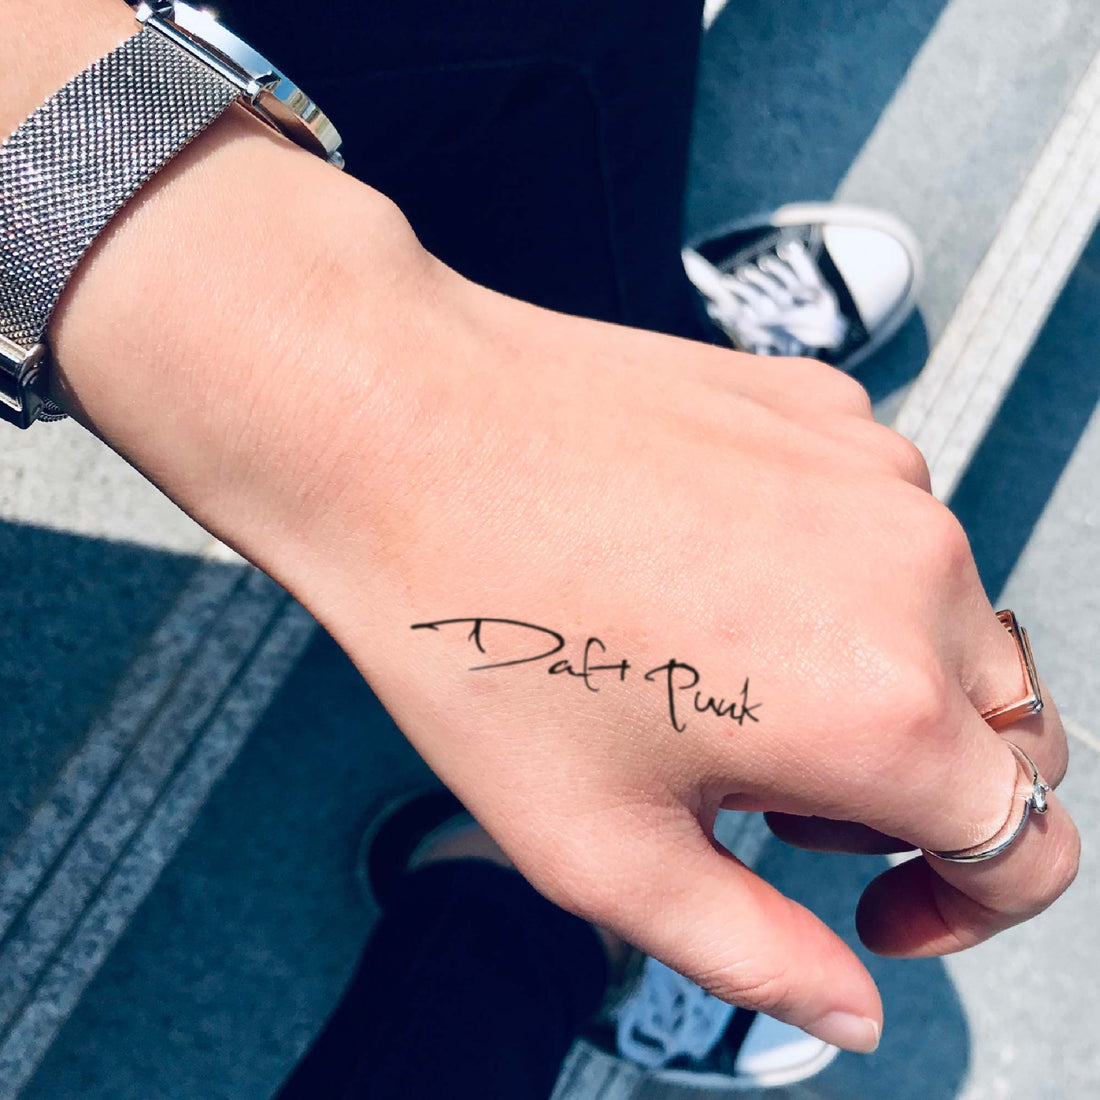 Daft Punk custom temporary tattoo sticker design idea inspiration meanings removal arm wrist hand words font name signature calligraphy lyrics tour concert outfits merch accessory gift souvenir costumes wear dress up code